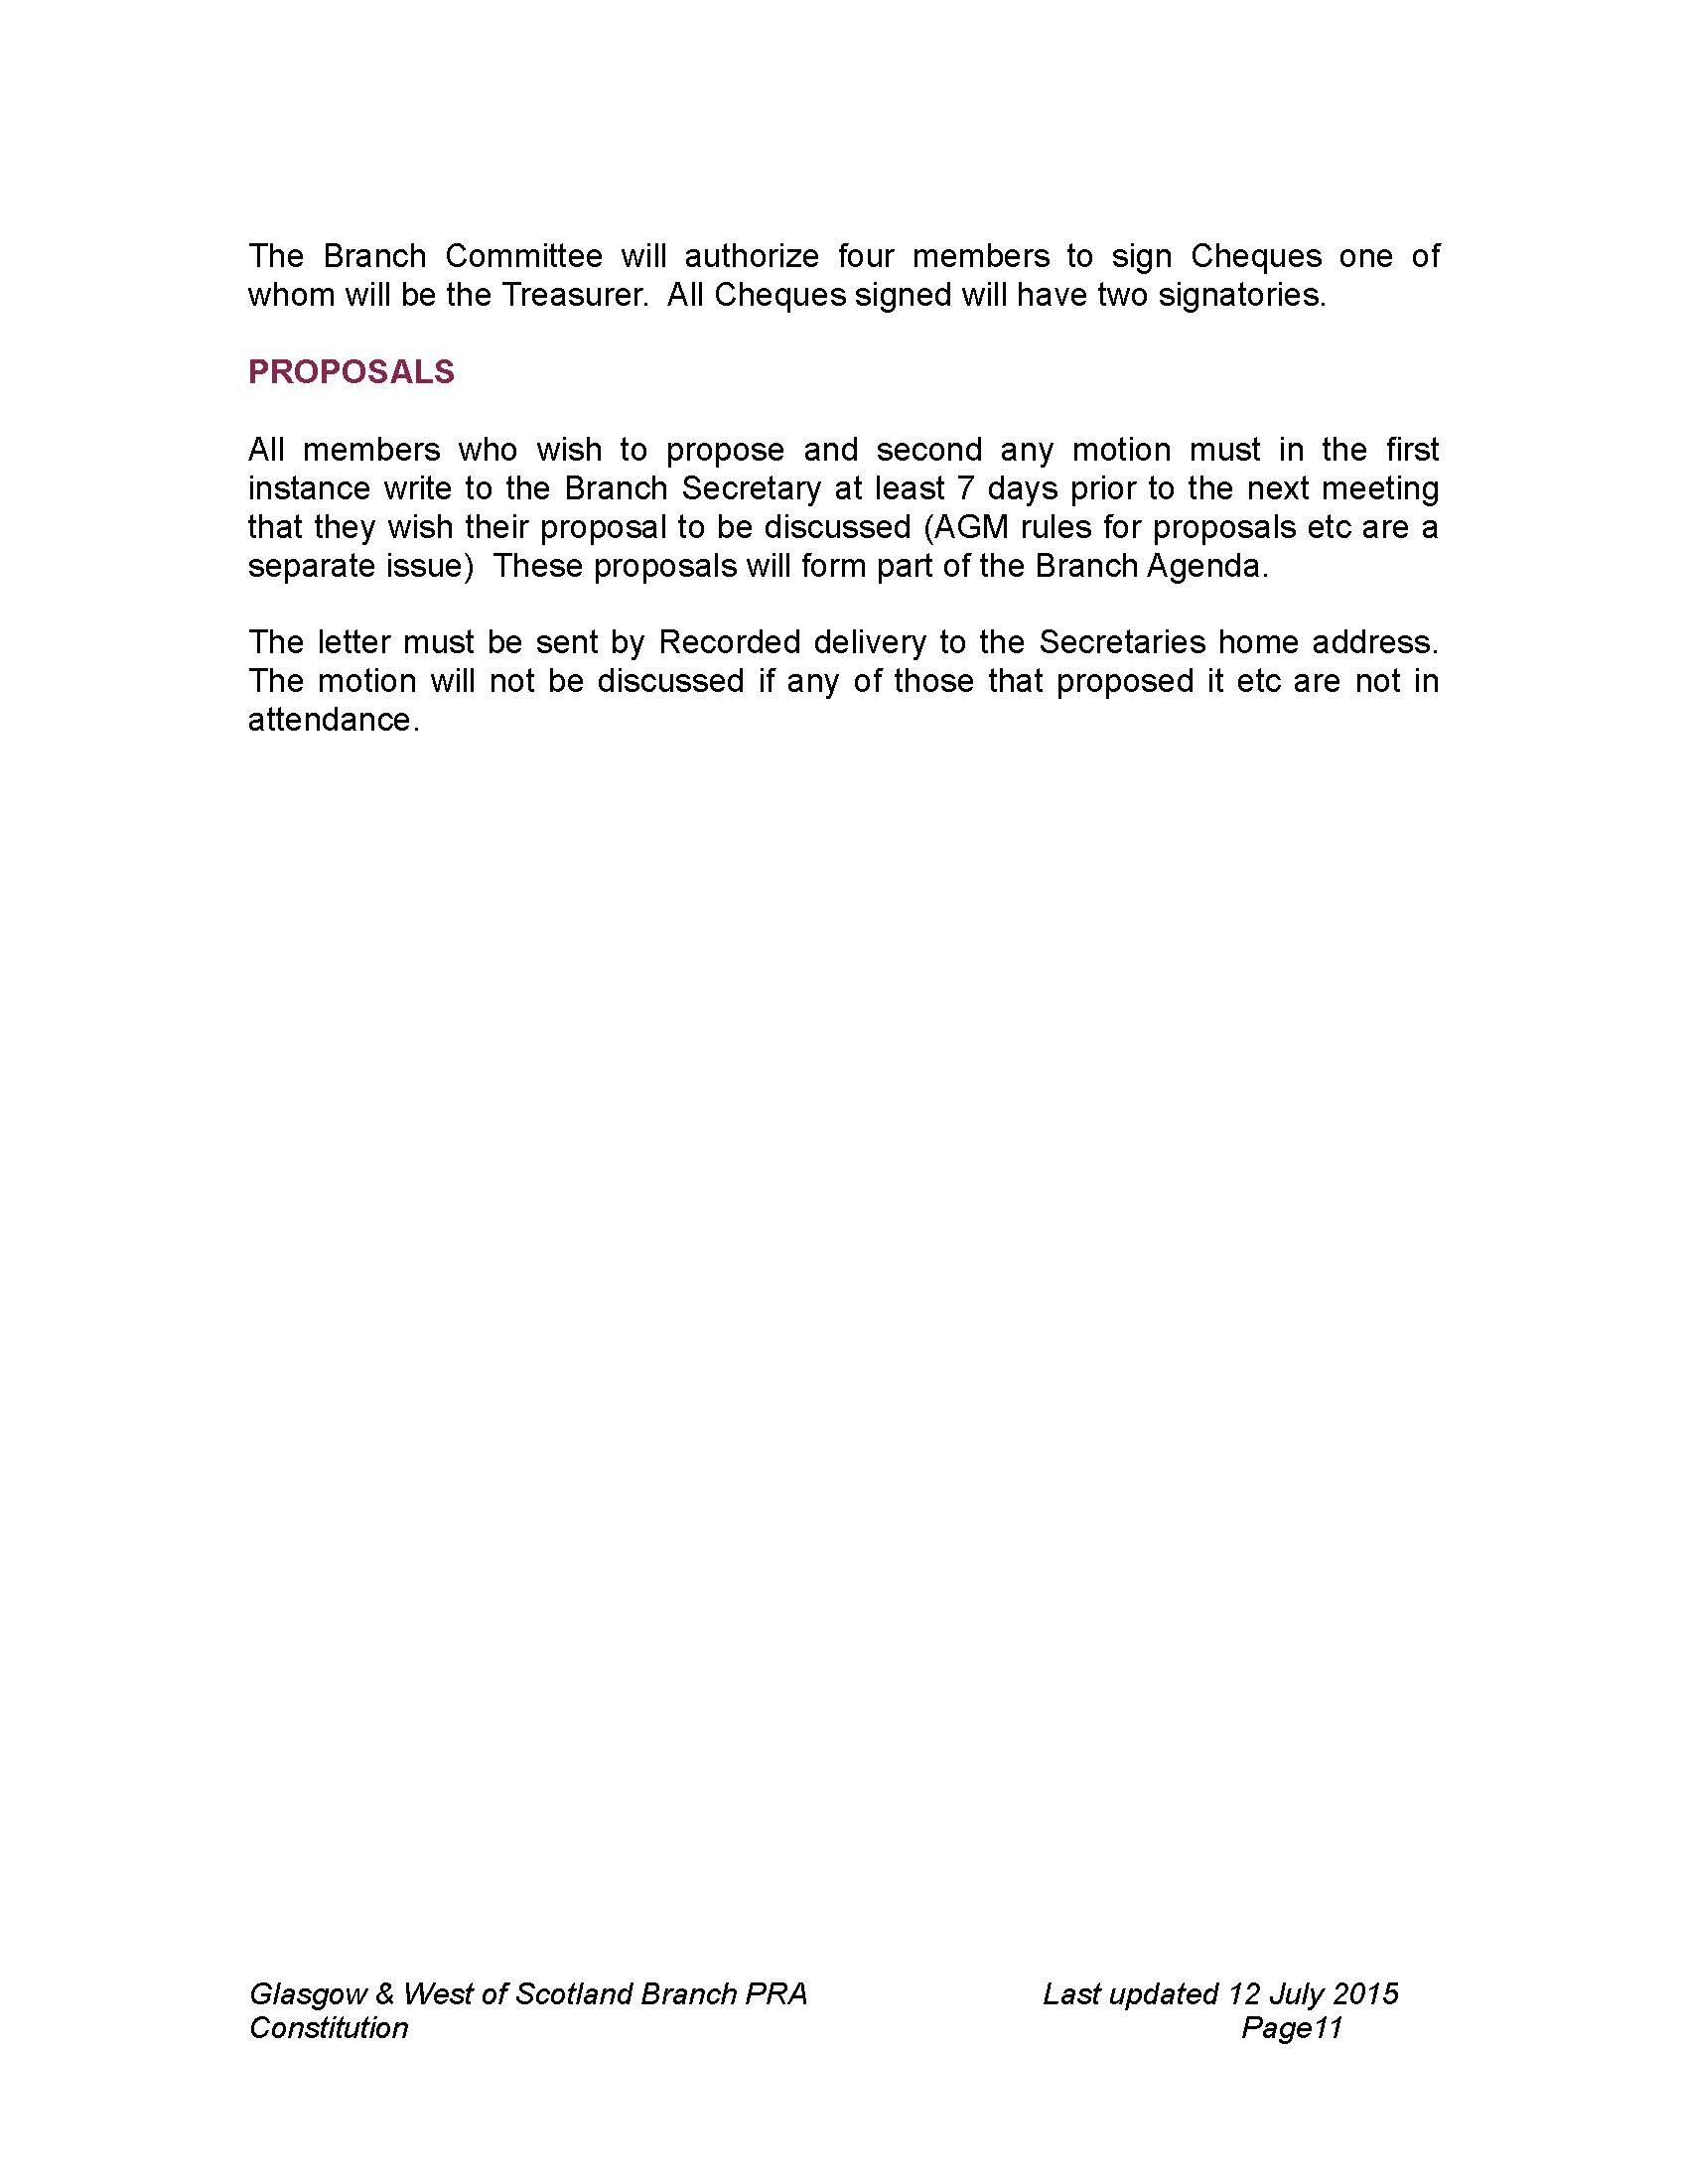 The Constitution of Glasgow & West  of Scotland Branch PRA July  2015_Page_10.jpg